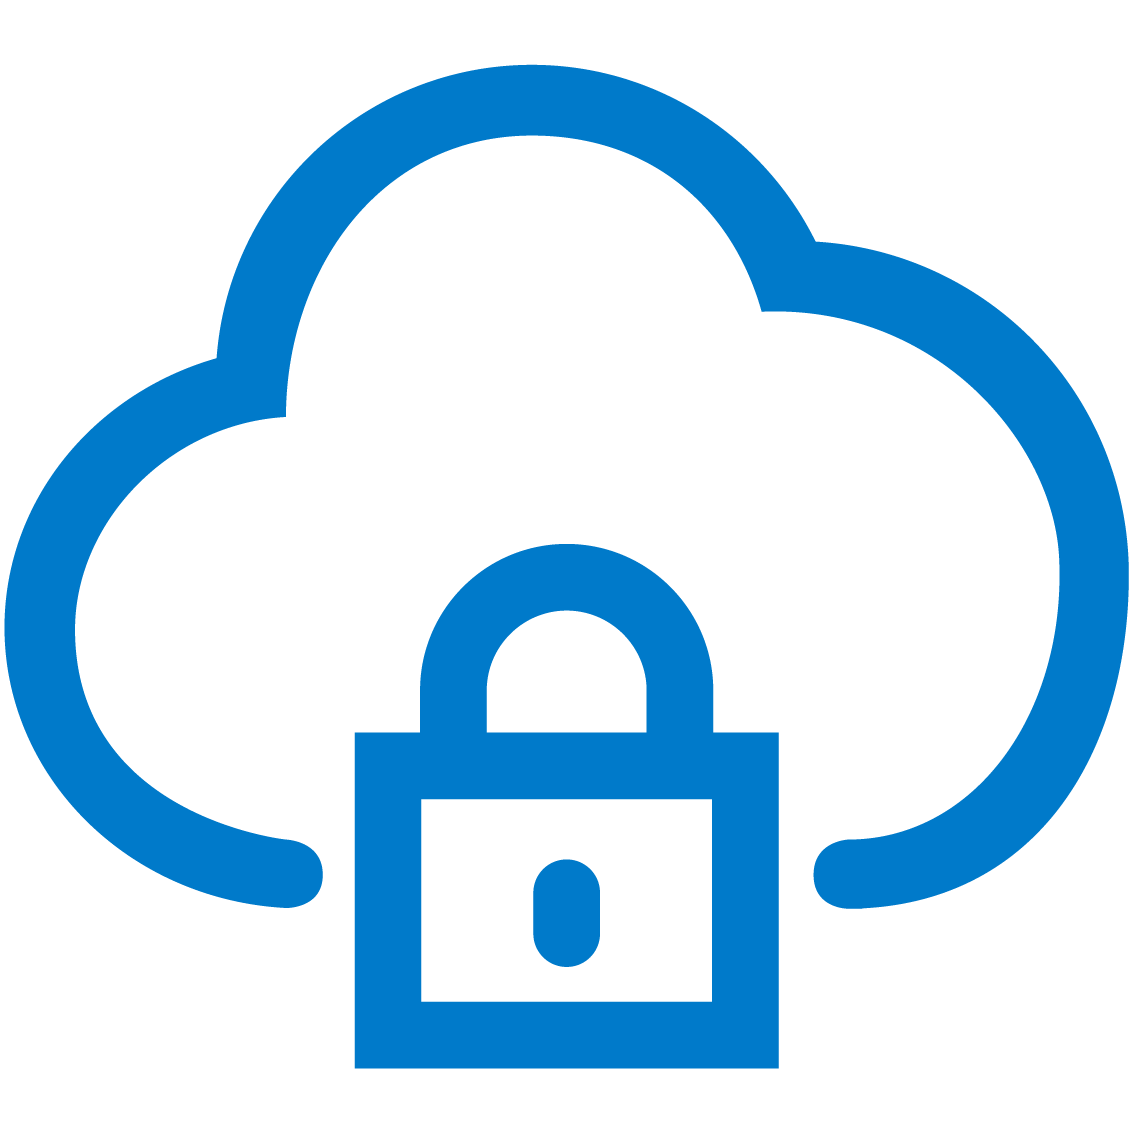 Blue cloud and blue keylock icon